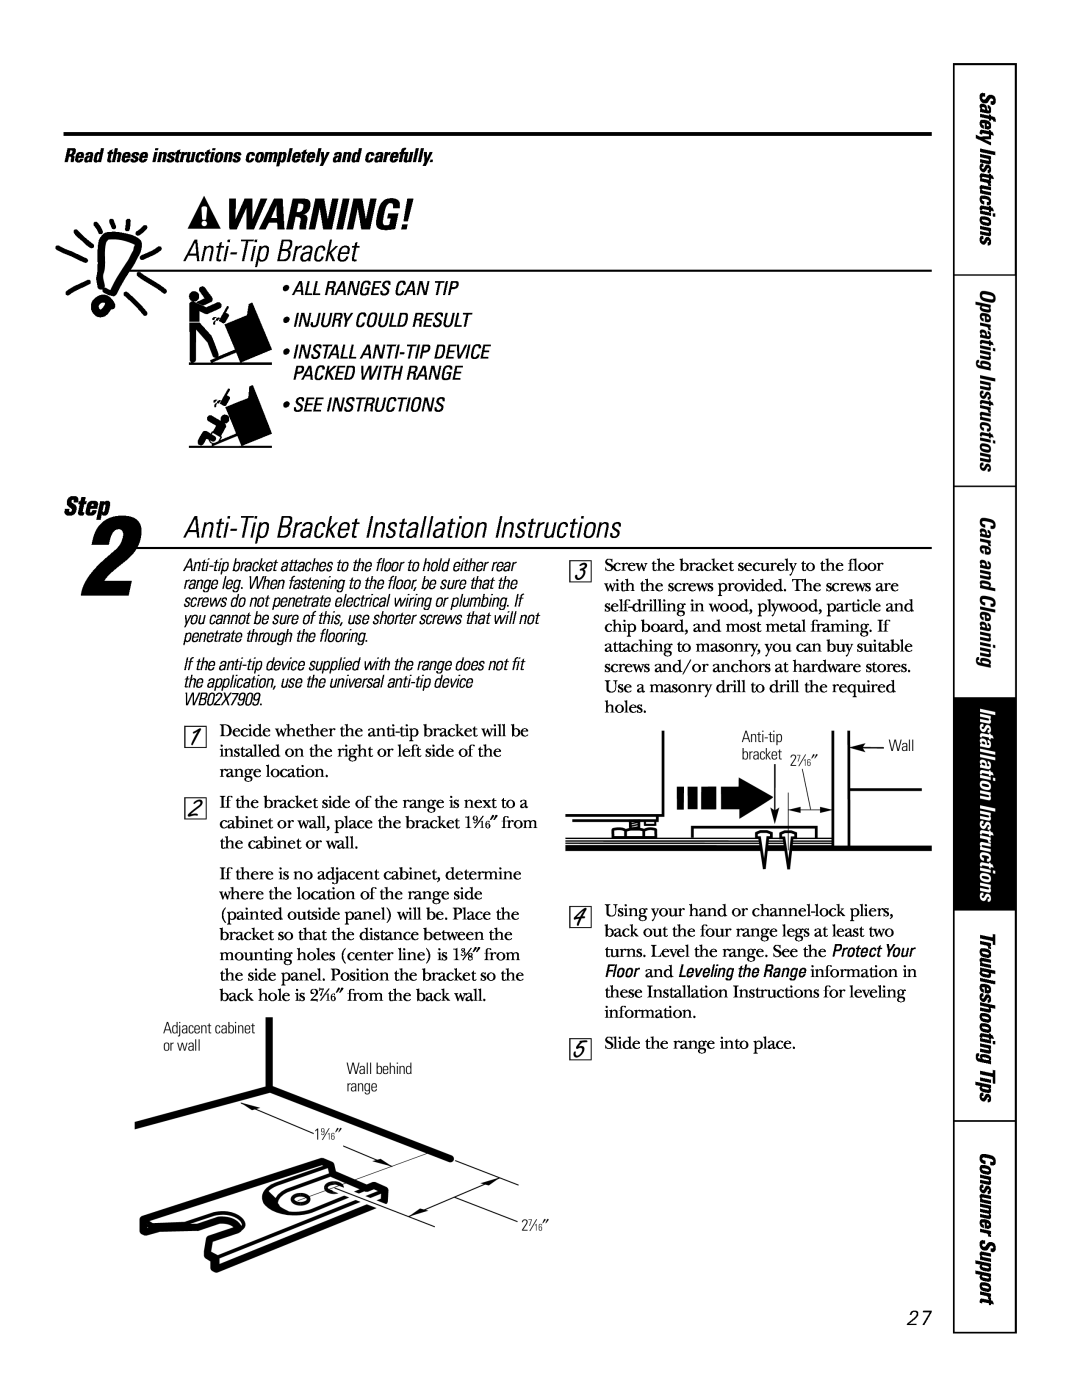 GE RGA624 Anti-Tip Bracket Installation Instructions, Support, Read these instructions completely and carefully 